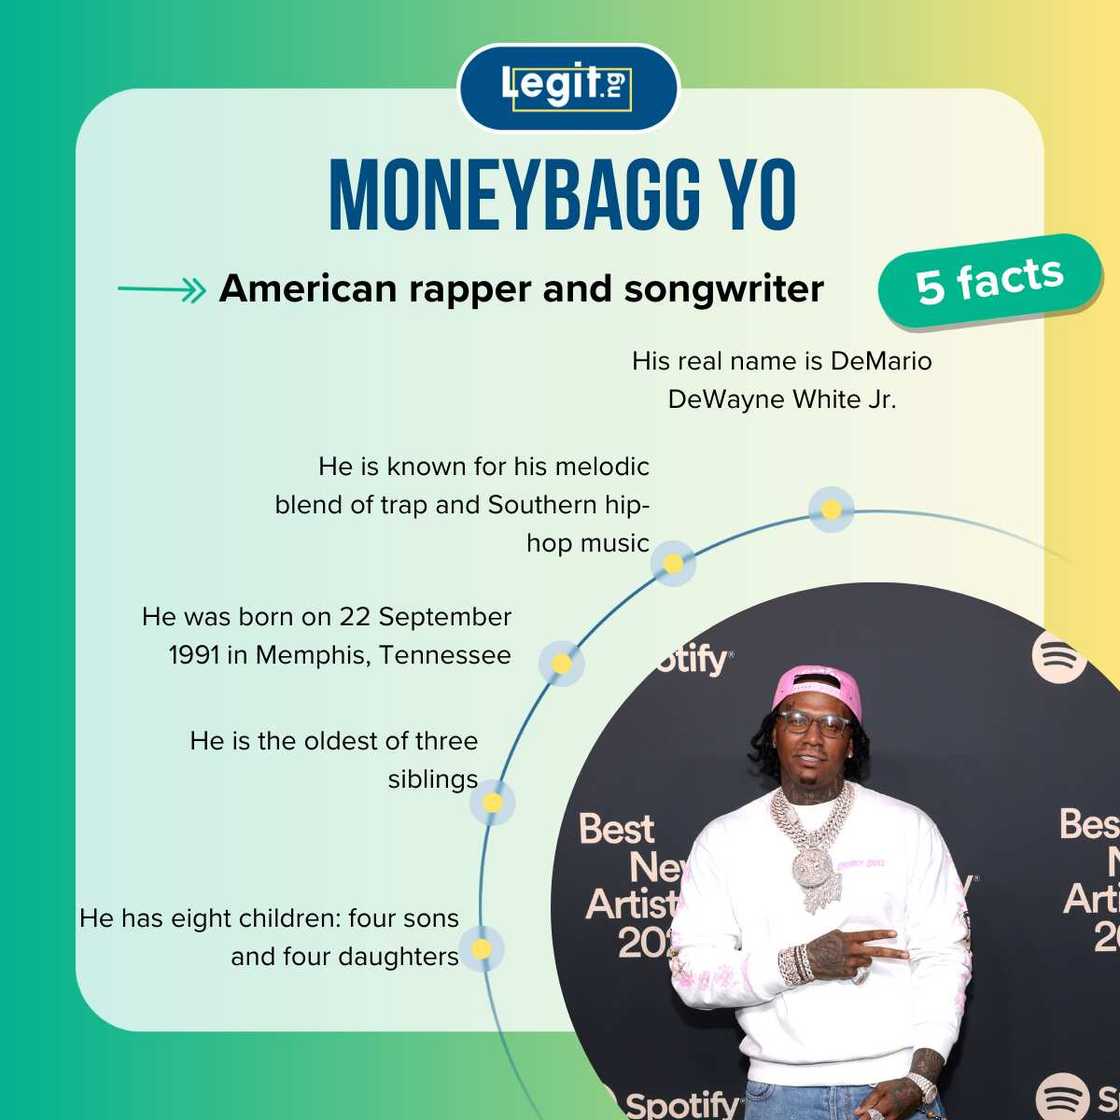 Facts about Moneybagg Yo